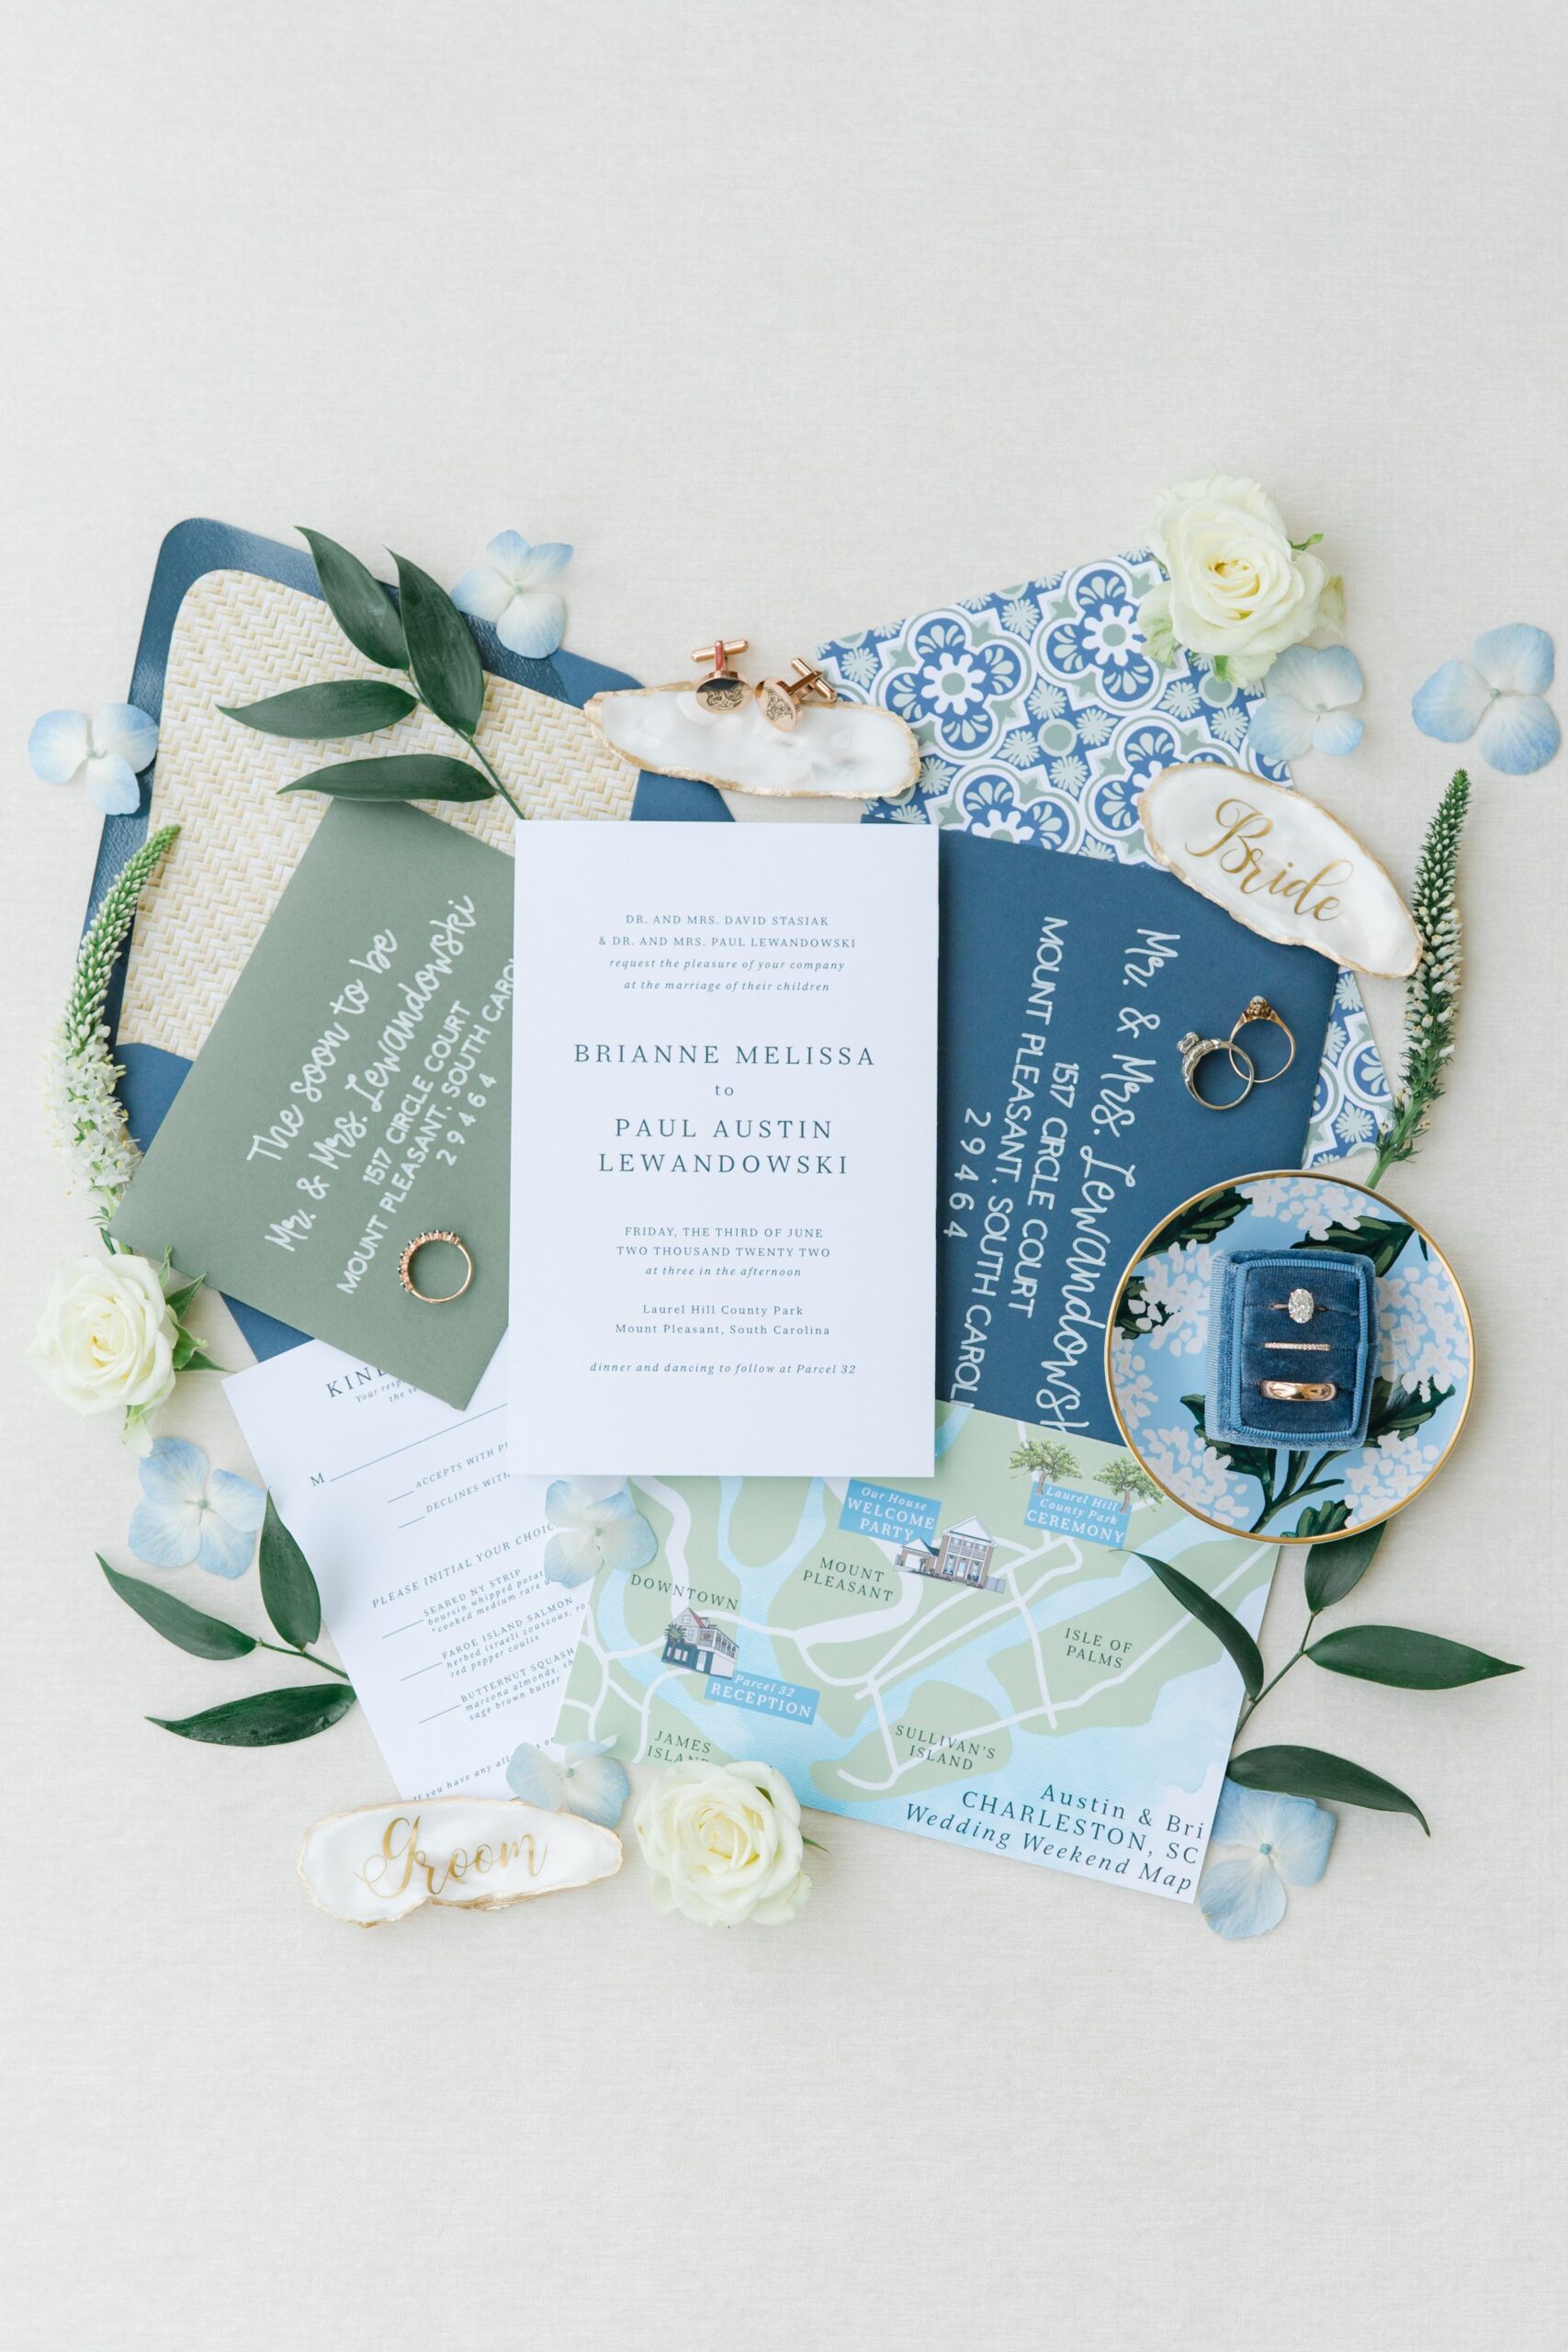 green and blue themed wedding day invitation suite.